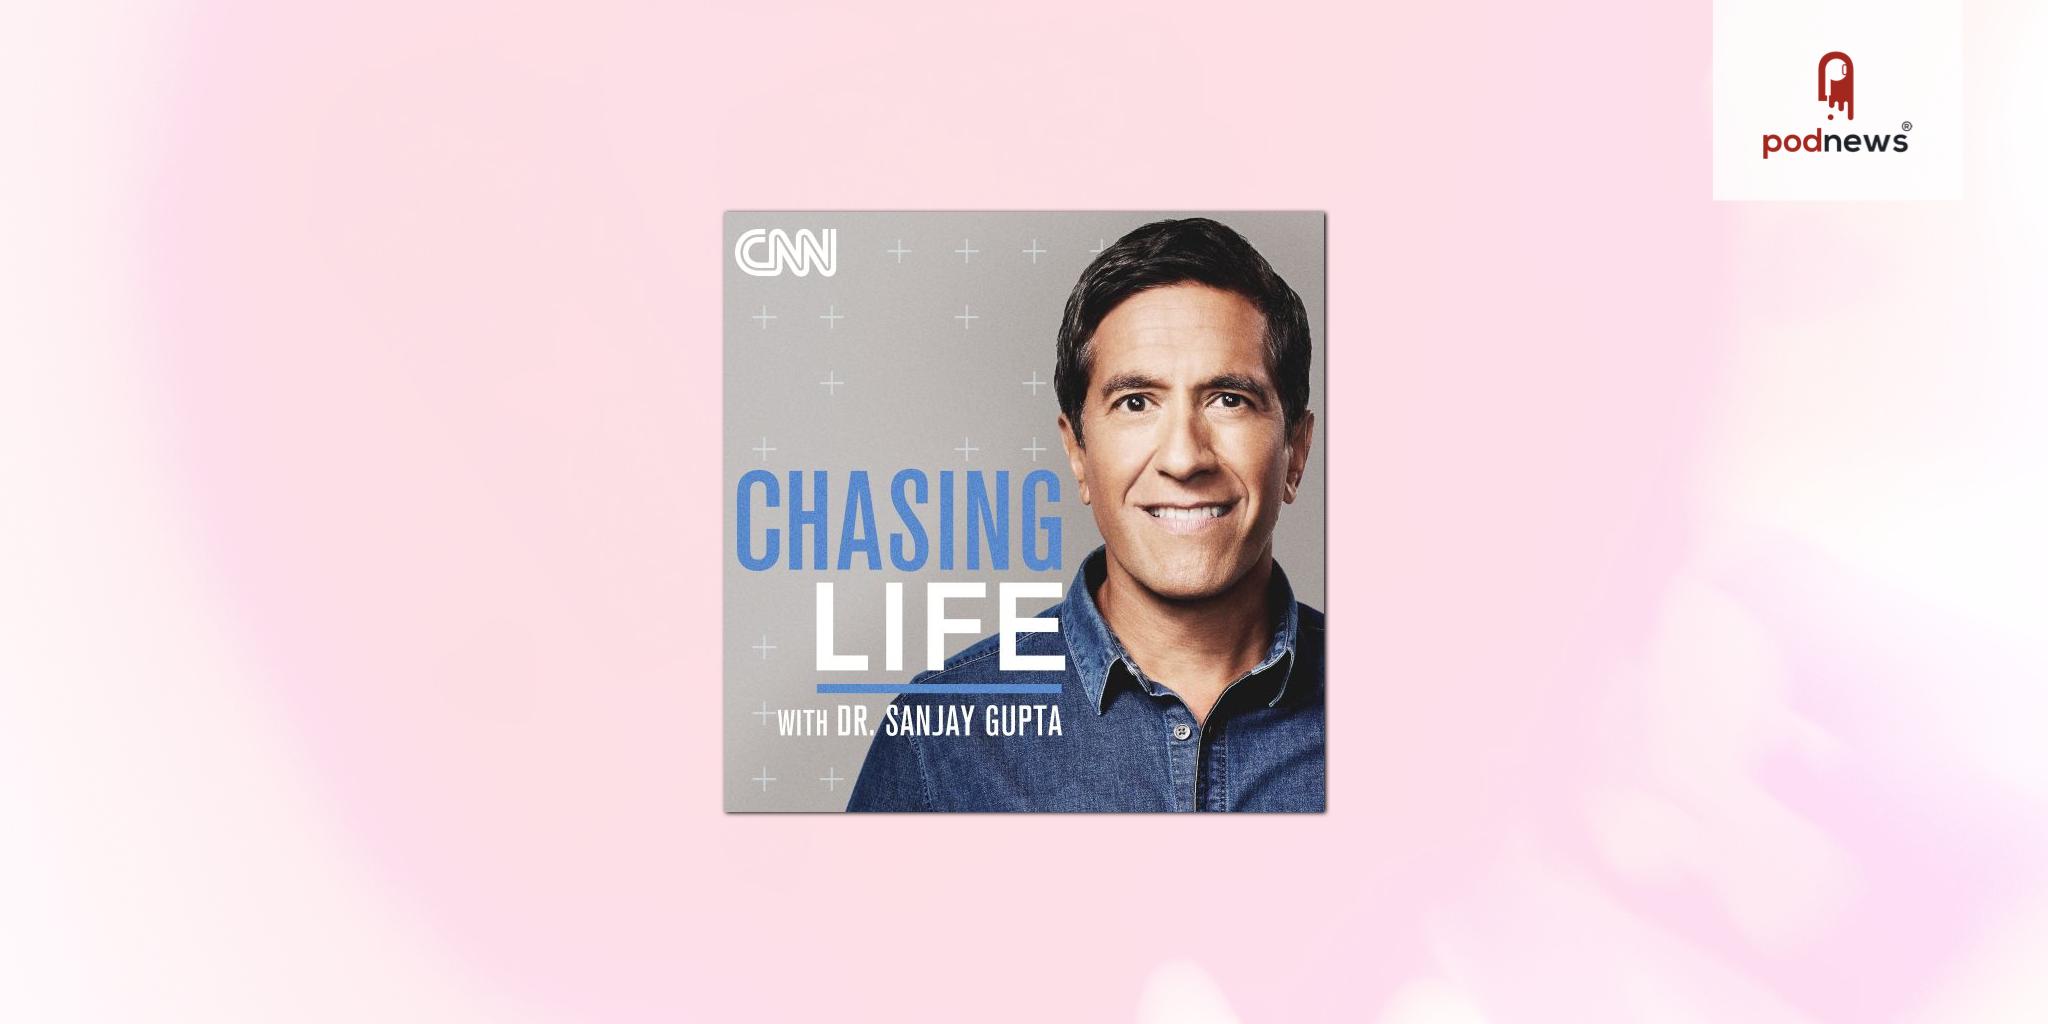 CNN Audio to debut new podcast 'Chasing Life' with Dr Sanjay Gupta